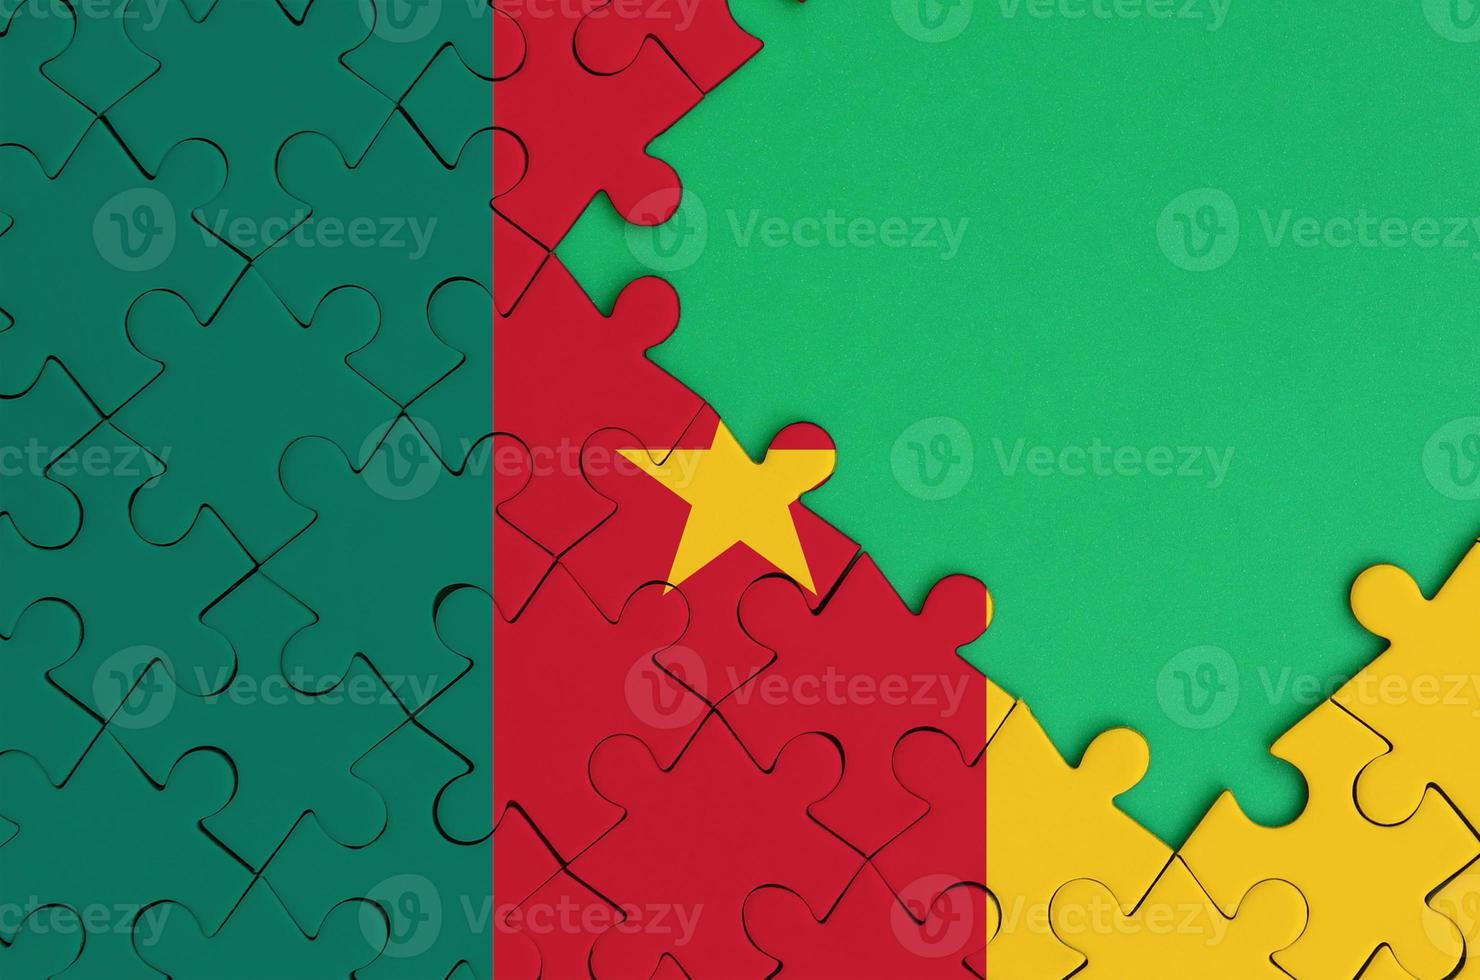 Cameroon flag is depicted on a completed jigsaw puzzle with free green copy space on the right side photo